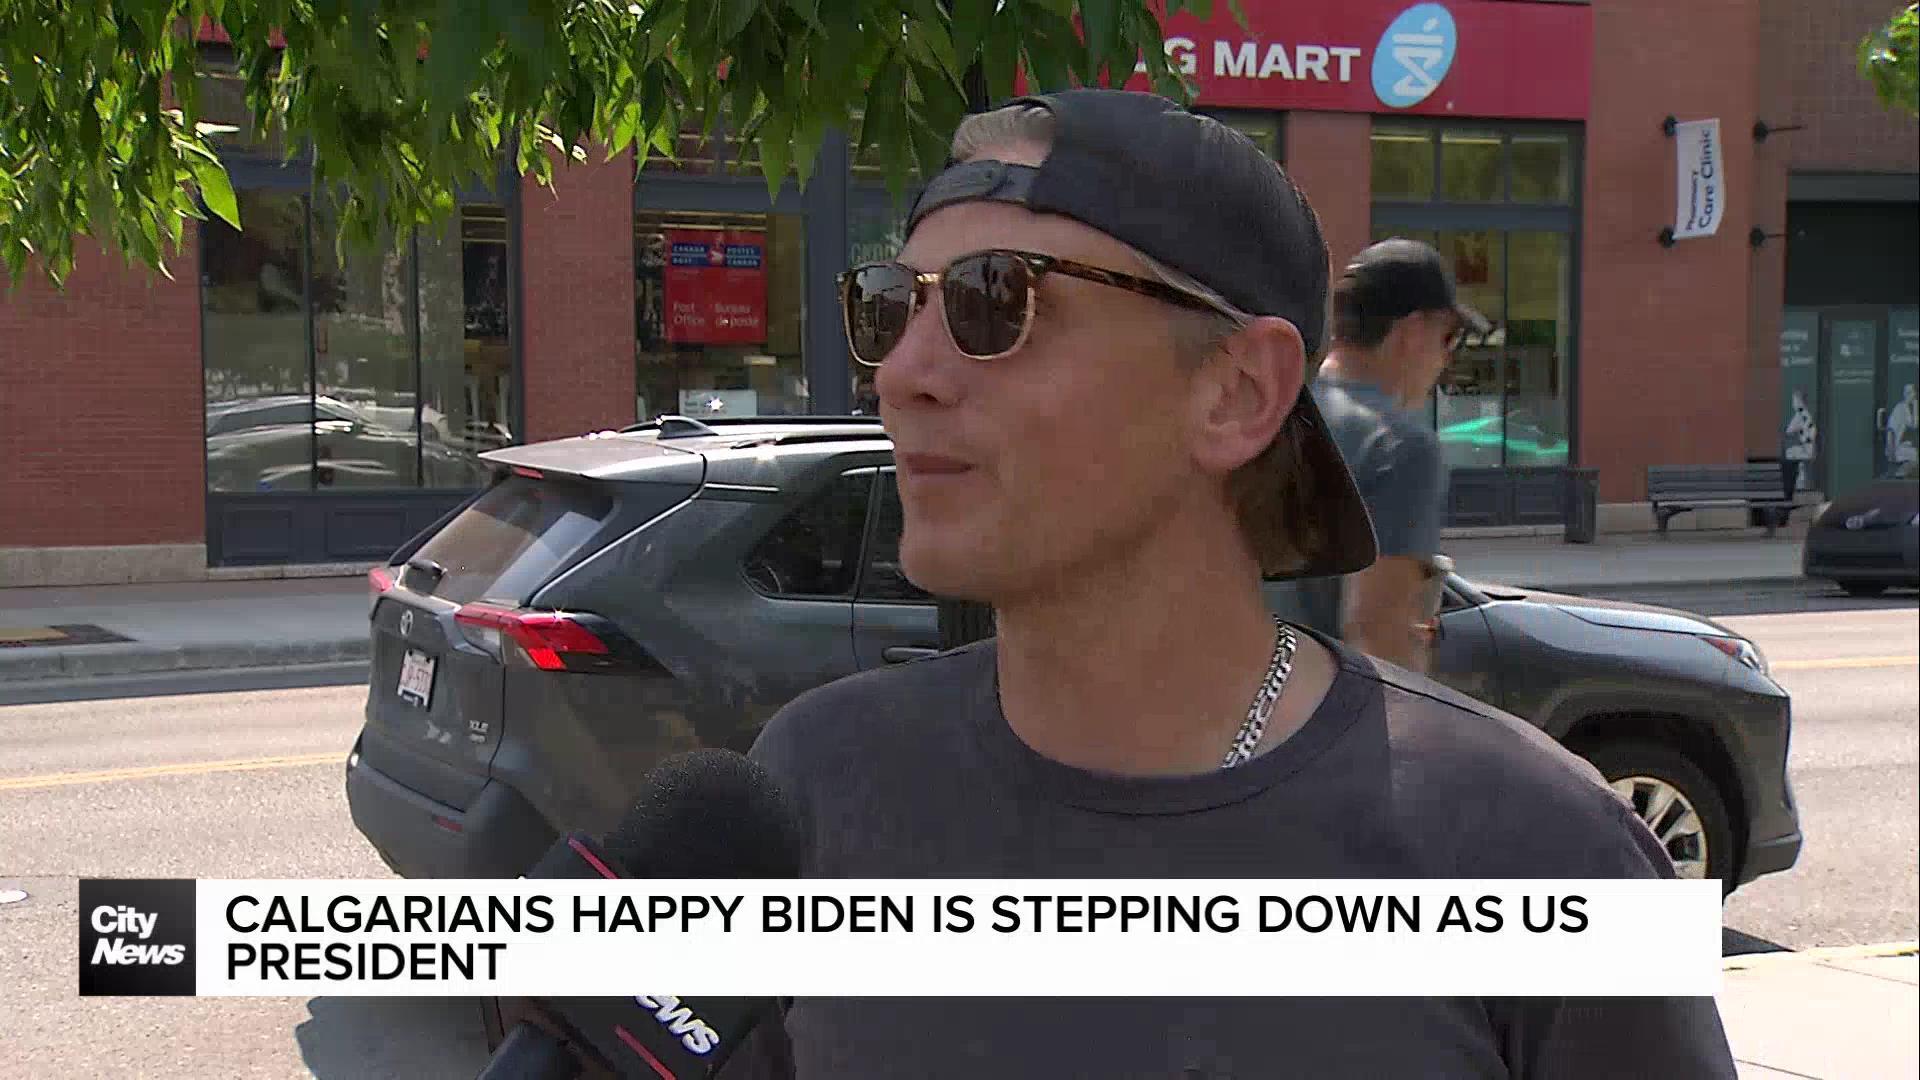 Calgarians react to Biden withdrawing from 2024 U.S. presidential race